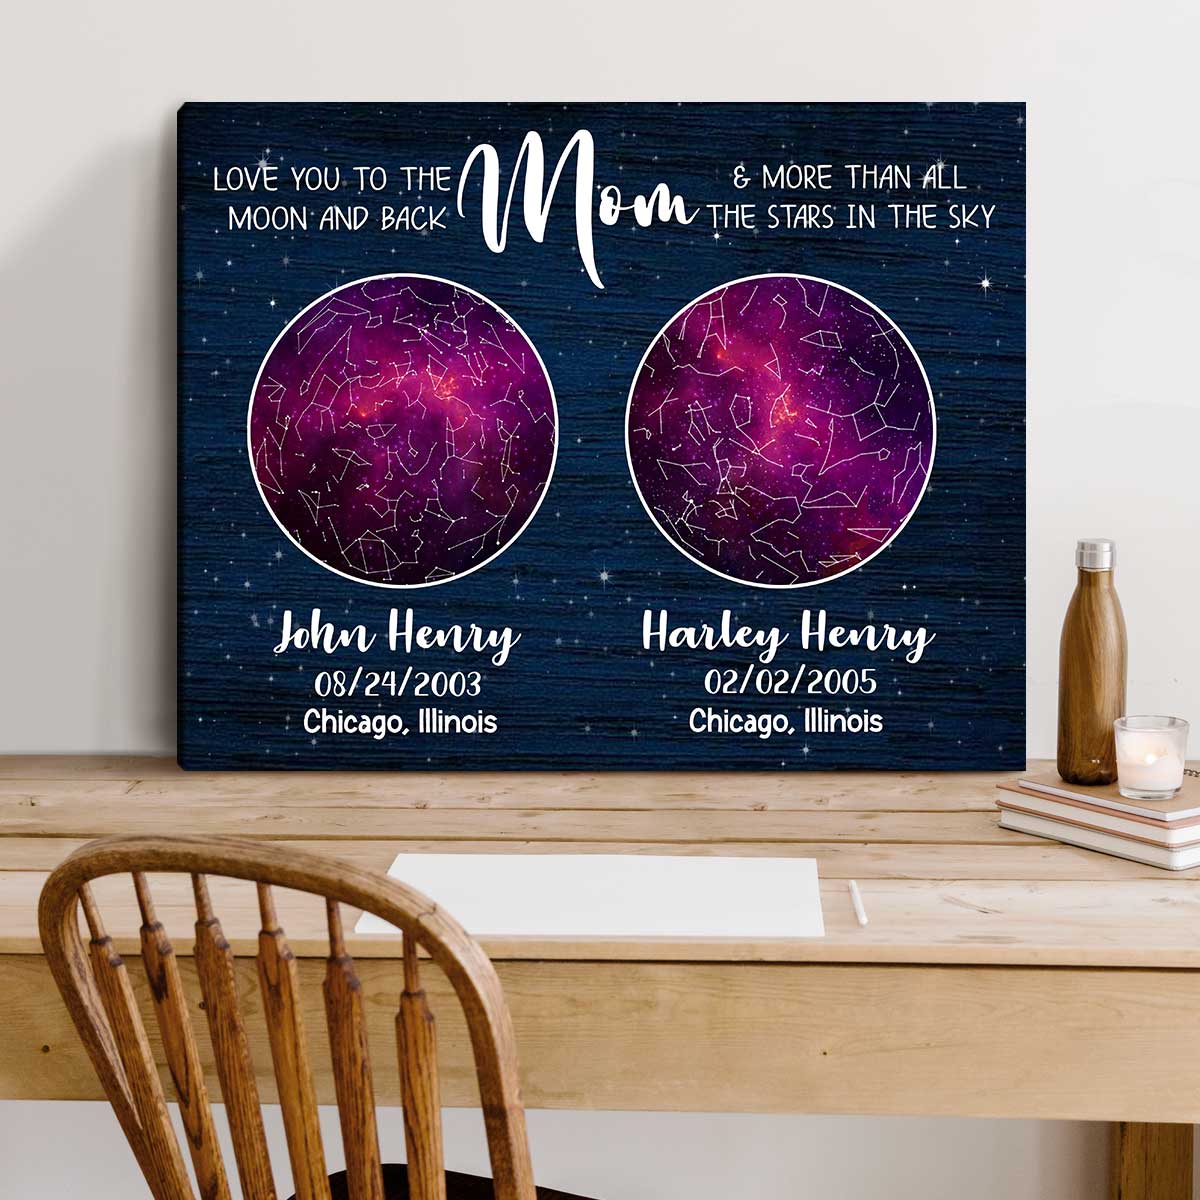 https://benicee.com/wp-content/uploads/2022/09/86562070-3a50-11ed-94d0-366e99cc6050__Personalized-Constellation-Map-Christmas-Gift-for-Mom-2-or-3-Children-Star-Map-Gift-for-Mom-from-Daughter-3201.jpg